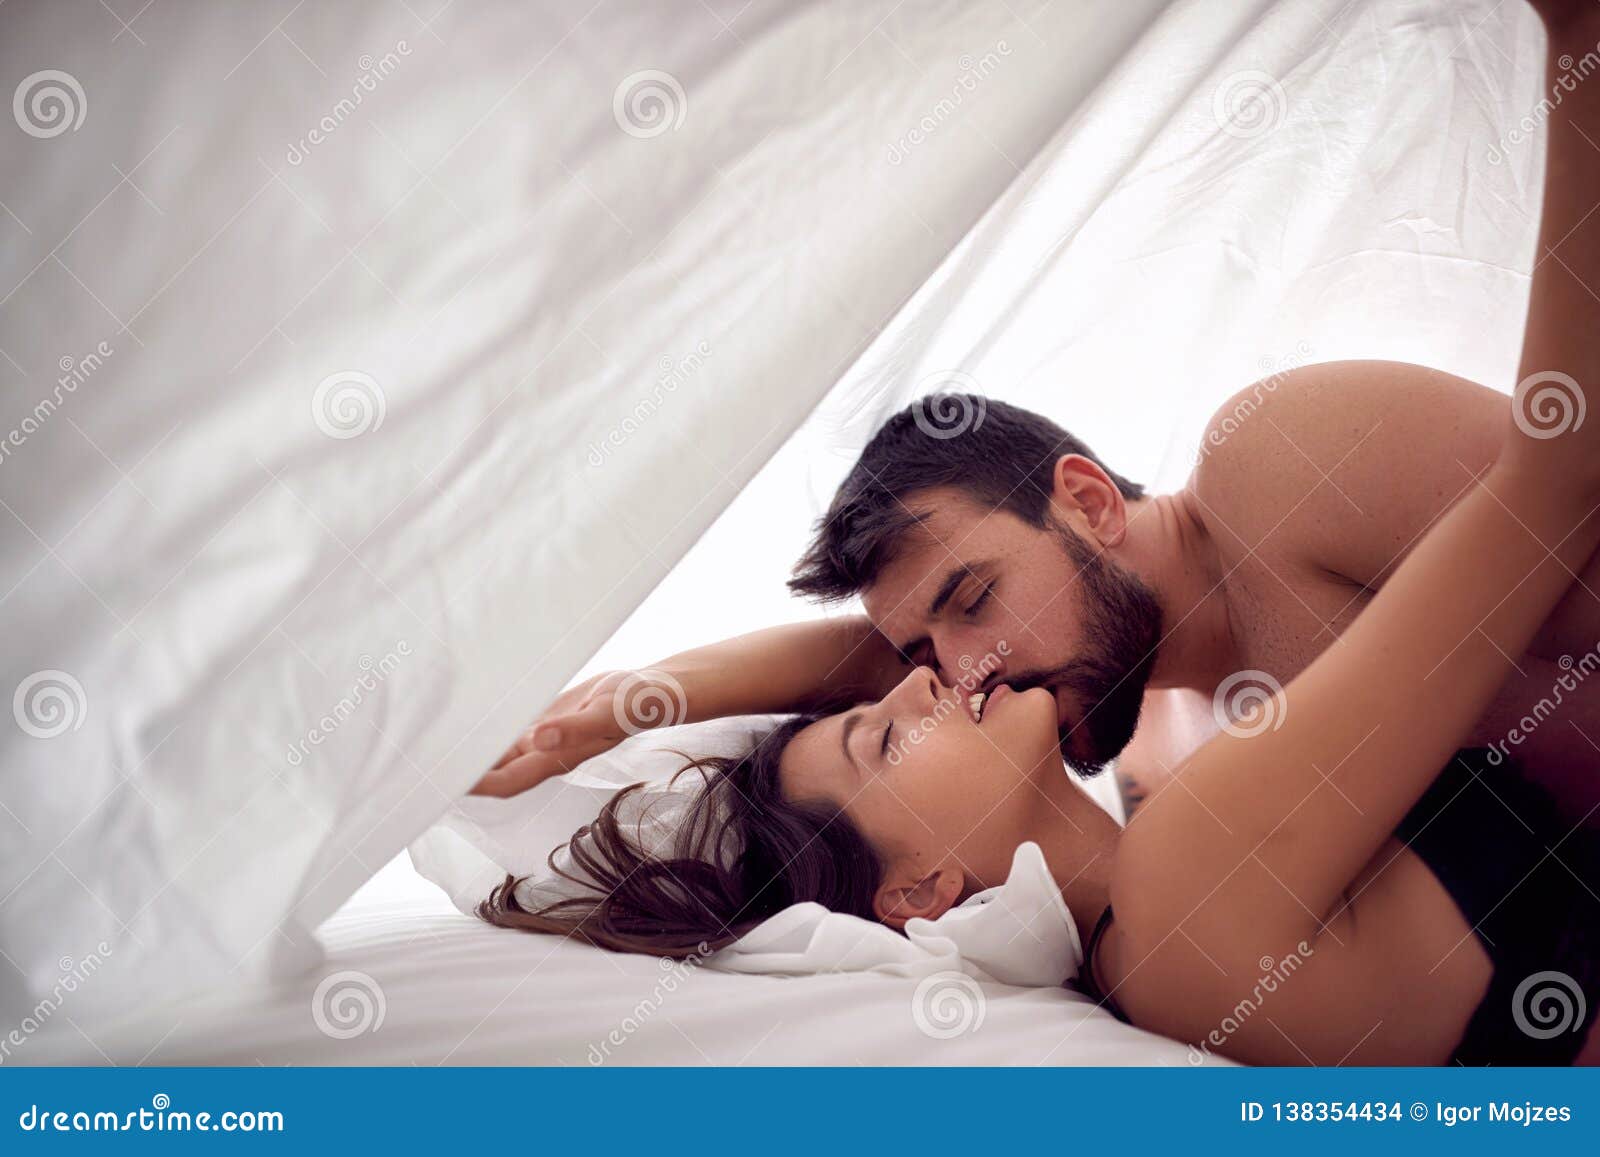 Couple Lovers Having Sex on a Bed in Morning with Lust and Love picture